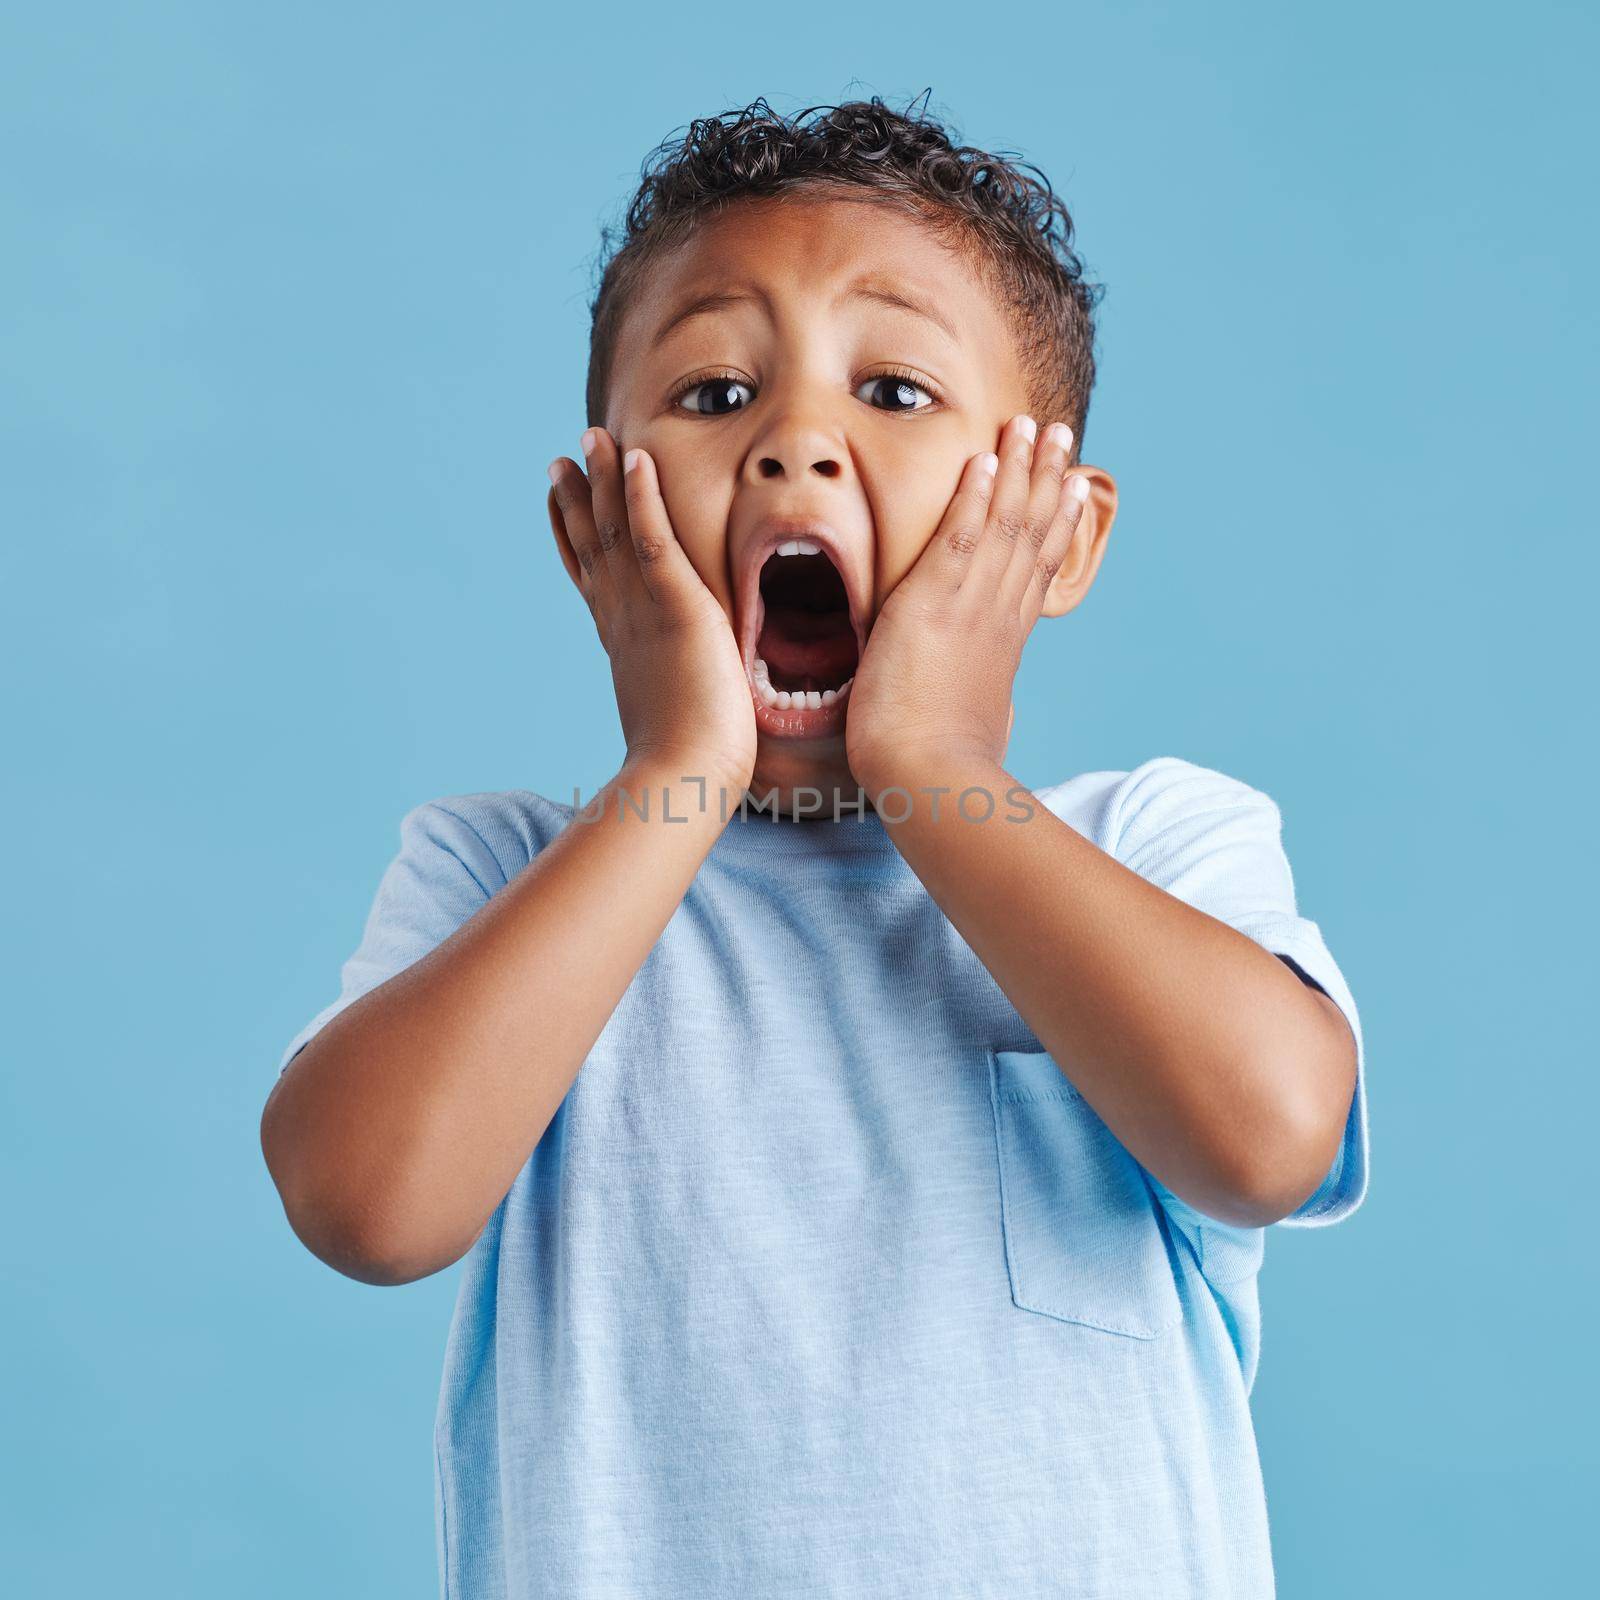 Adorable little hispanic boy with hands on face and mouth open looking terrified and shocked showing true astonished reaction against a blue studio background by YuriArcurs